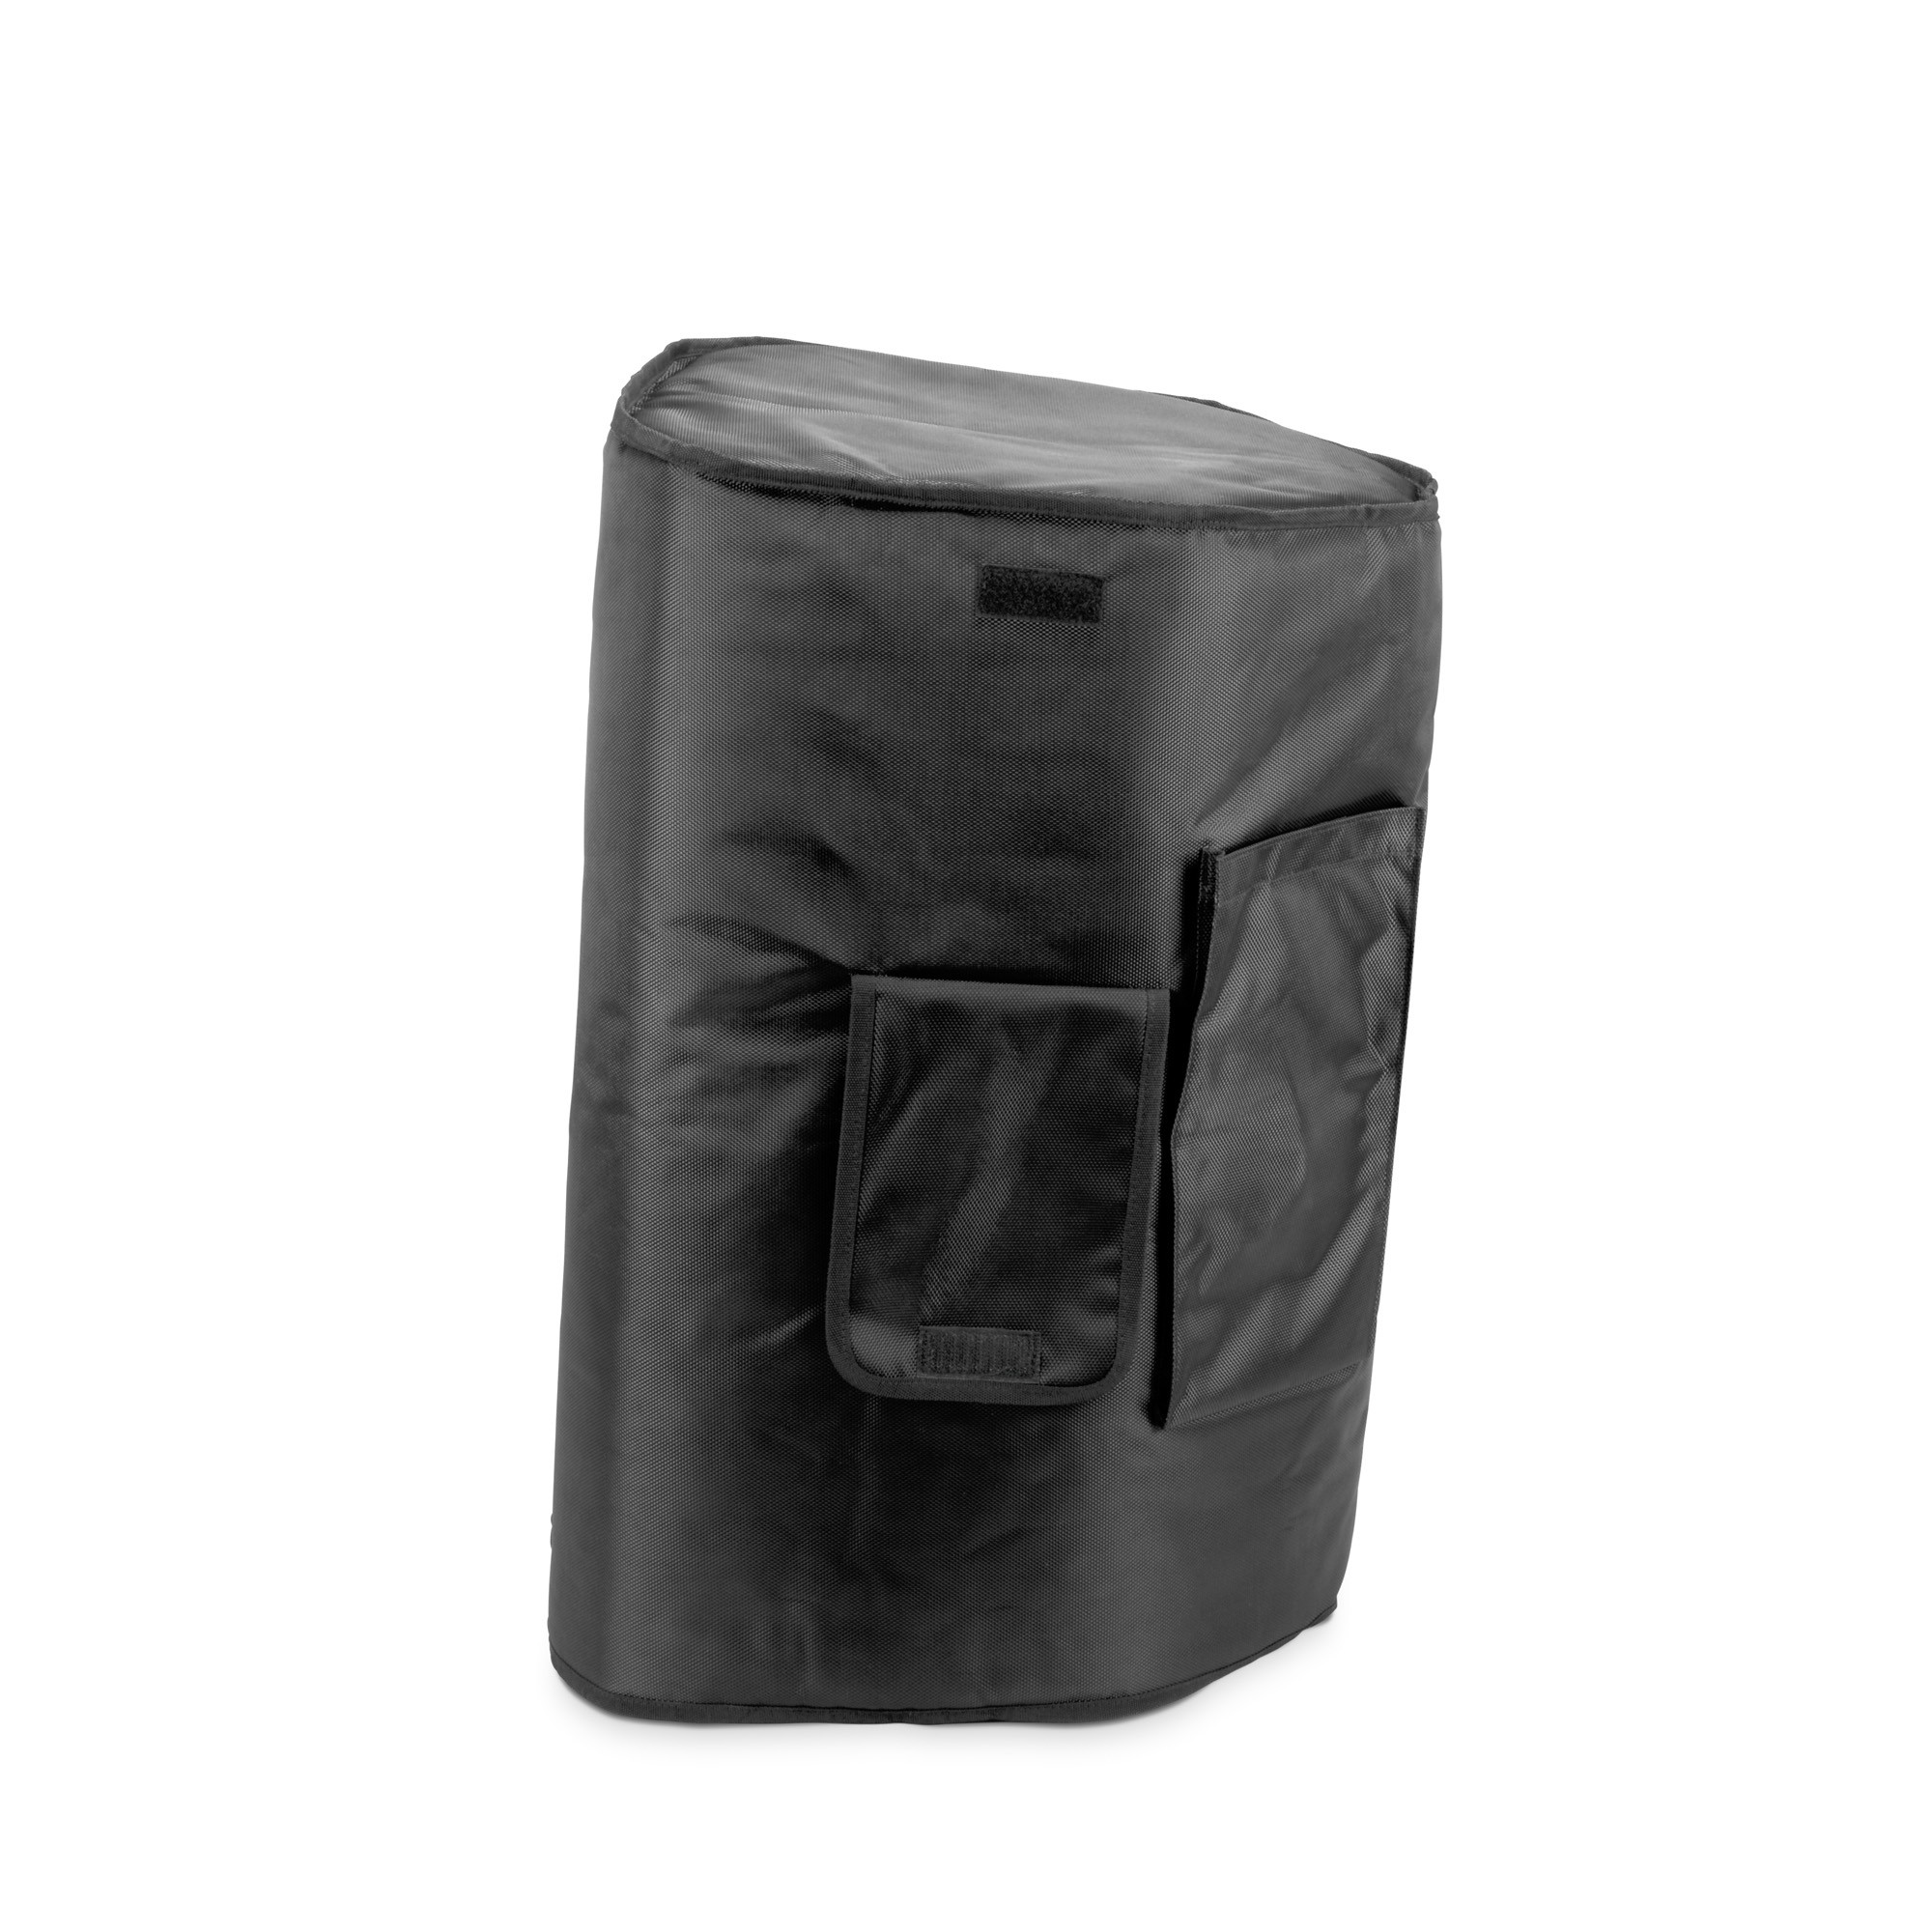 Ld Systems Icoa 15 Pc - Bag for speakers & subwoofer - Variation 1